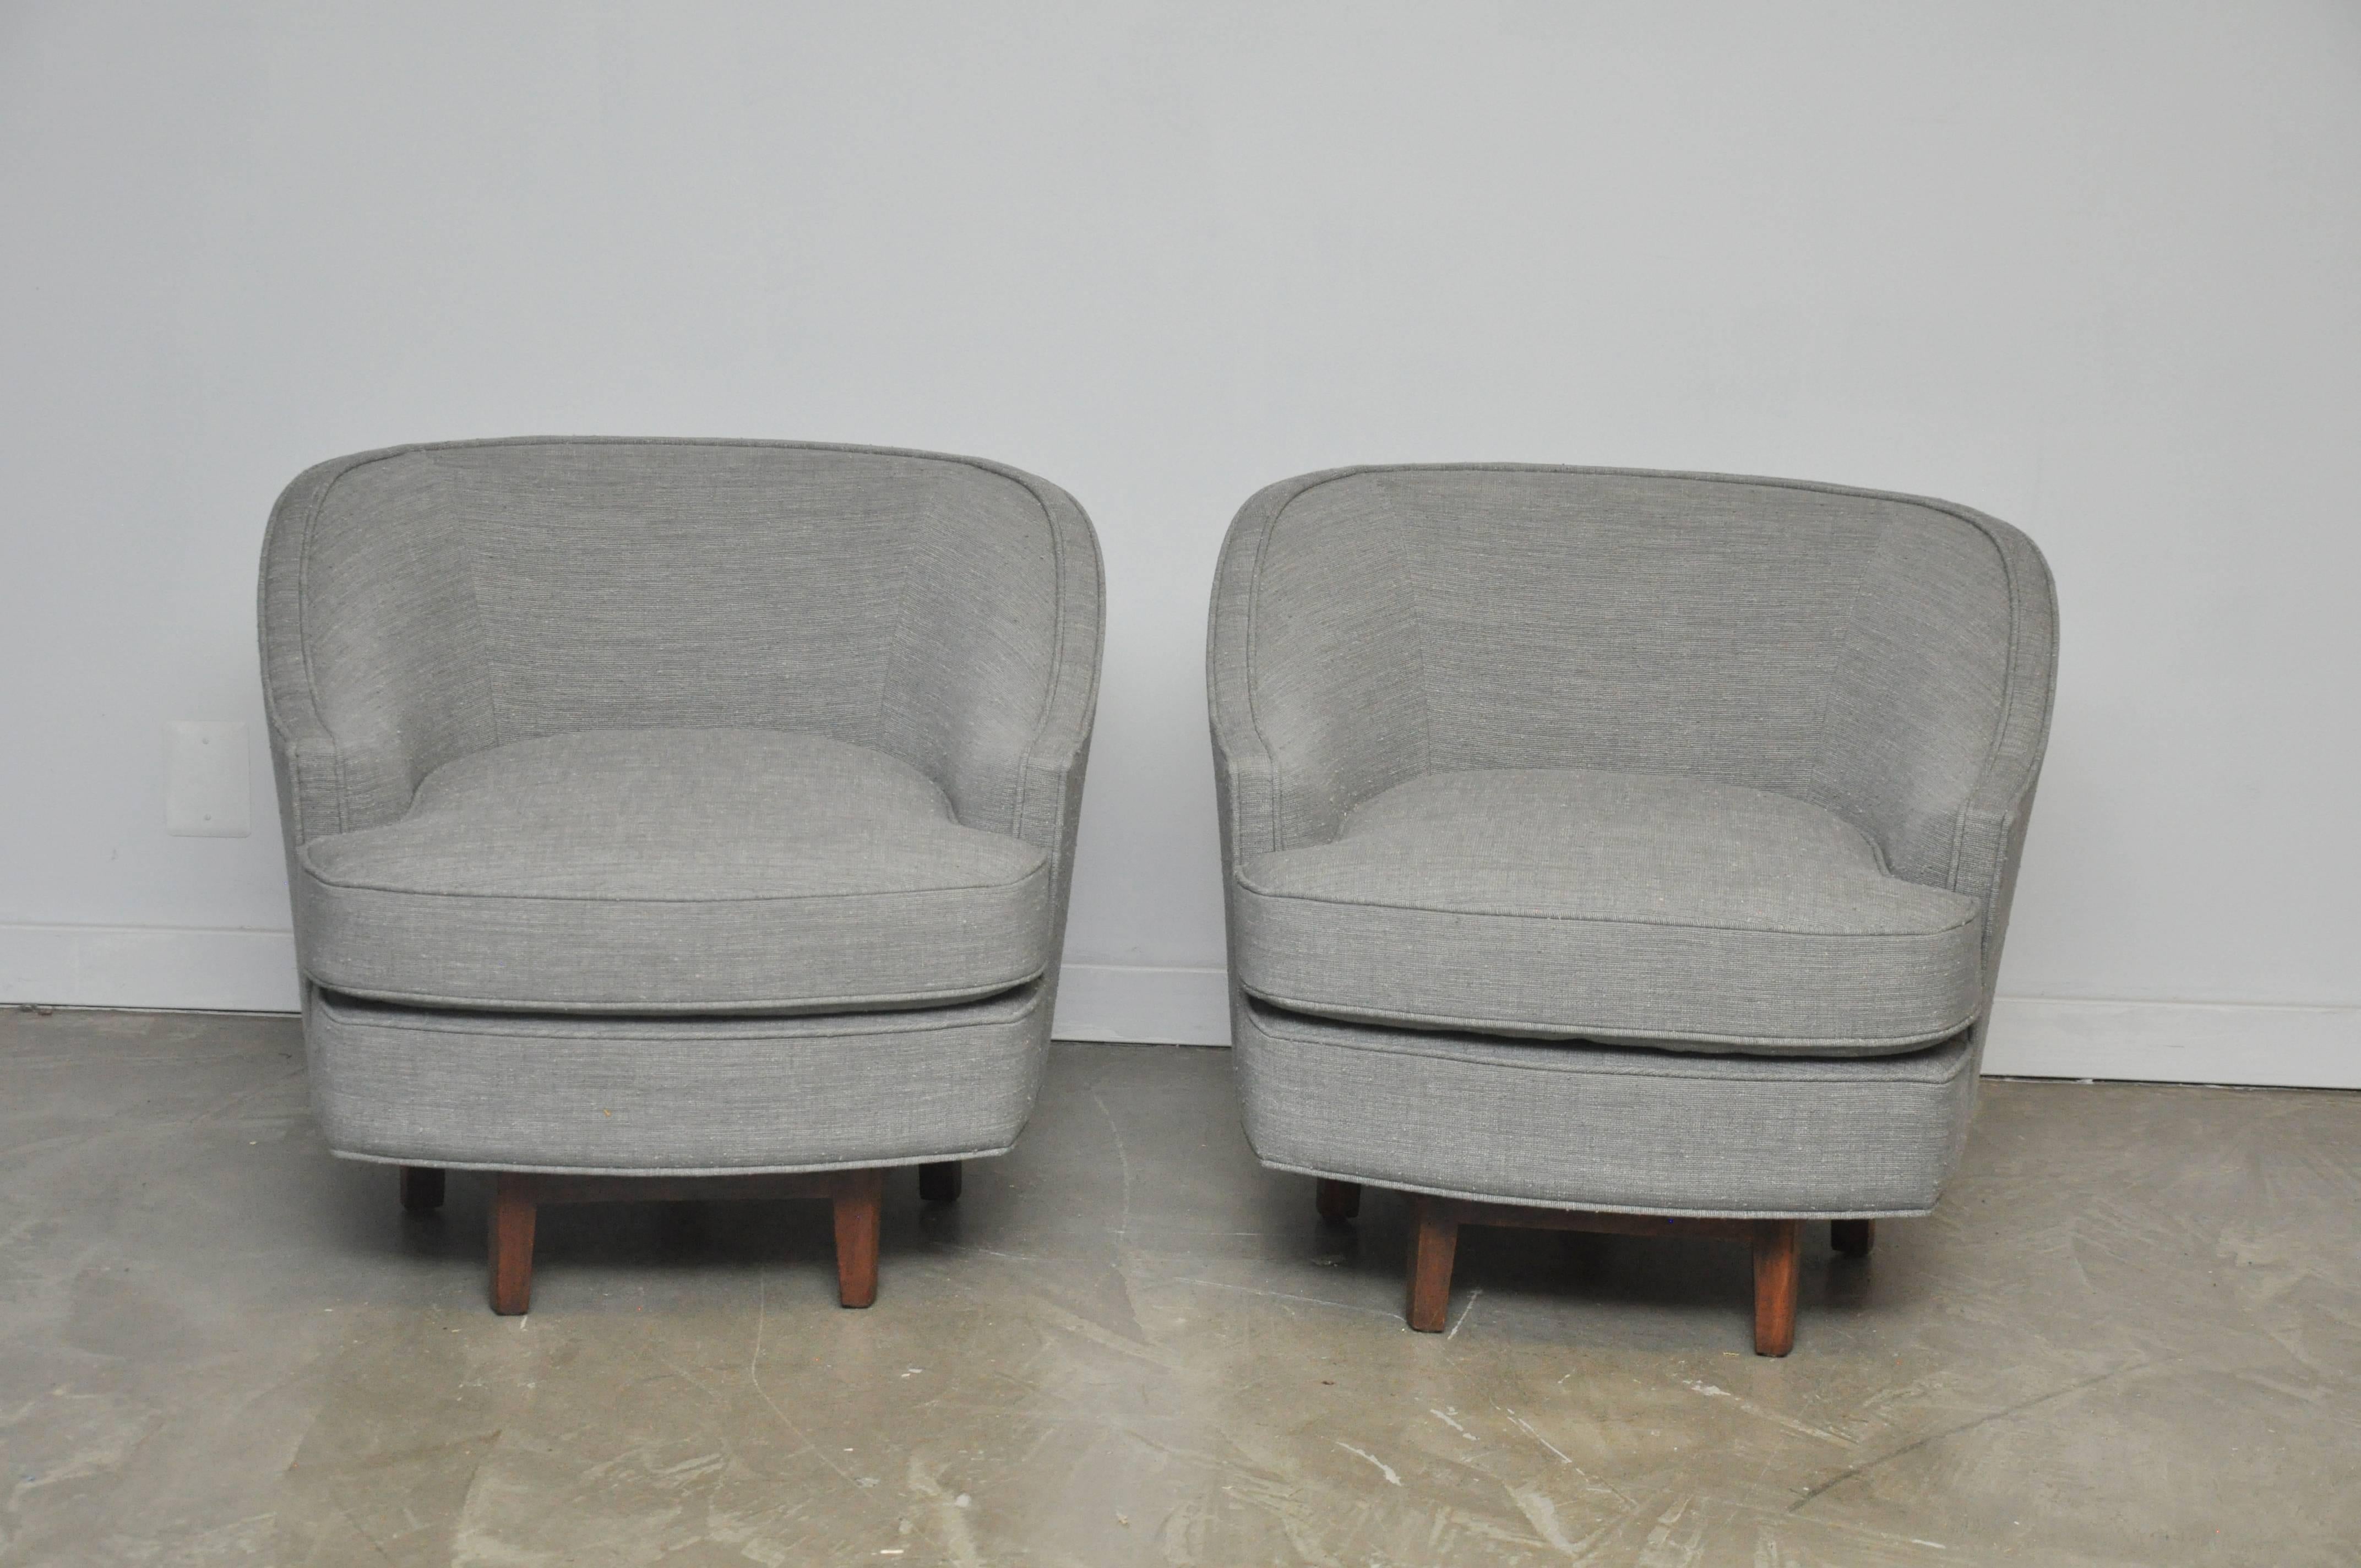 Pair of Dunbar swivel chairs on walnut bases. Fully restored and reupholstered in grey tweed.